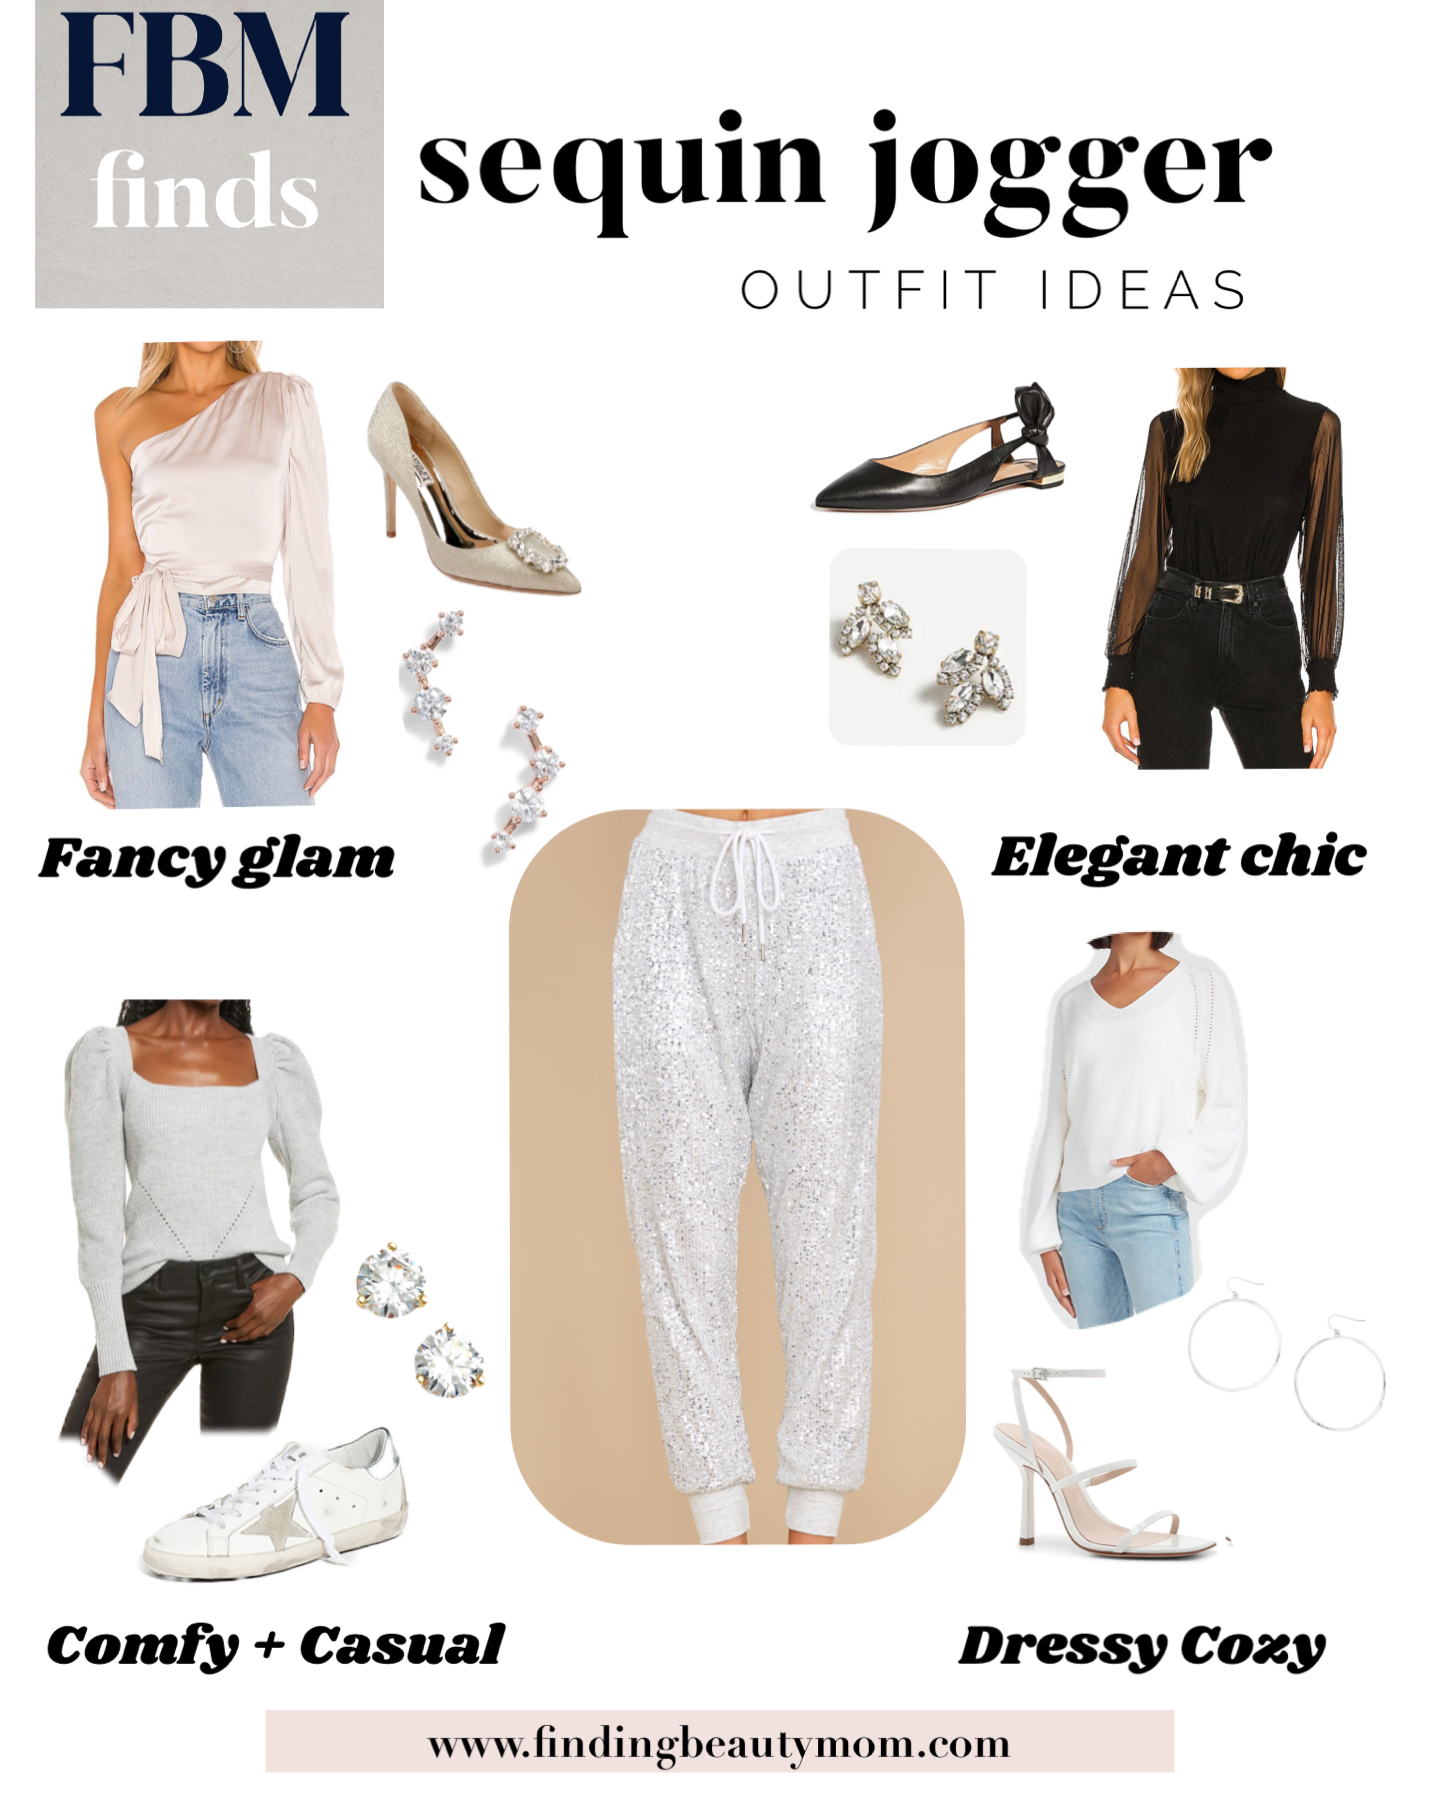 Sequin jogger outfit ideas, how to style sequin joggers, cozy glam styles, elegant chic holiday outfits 